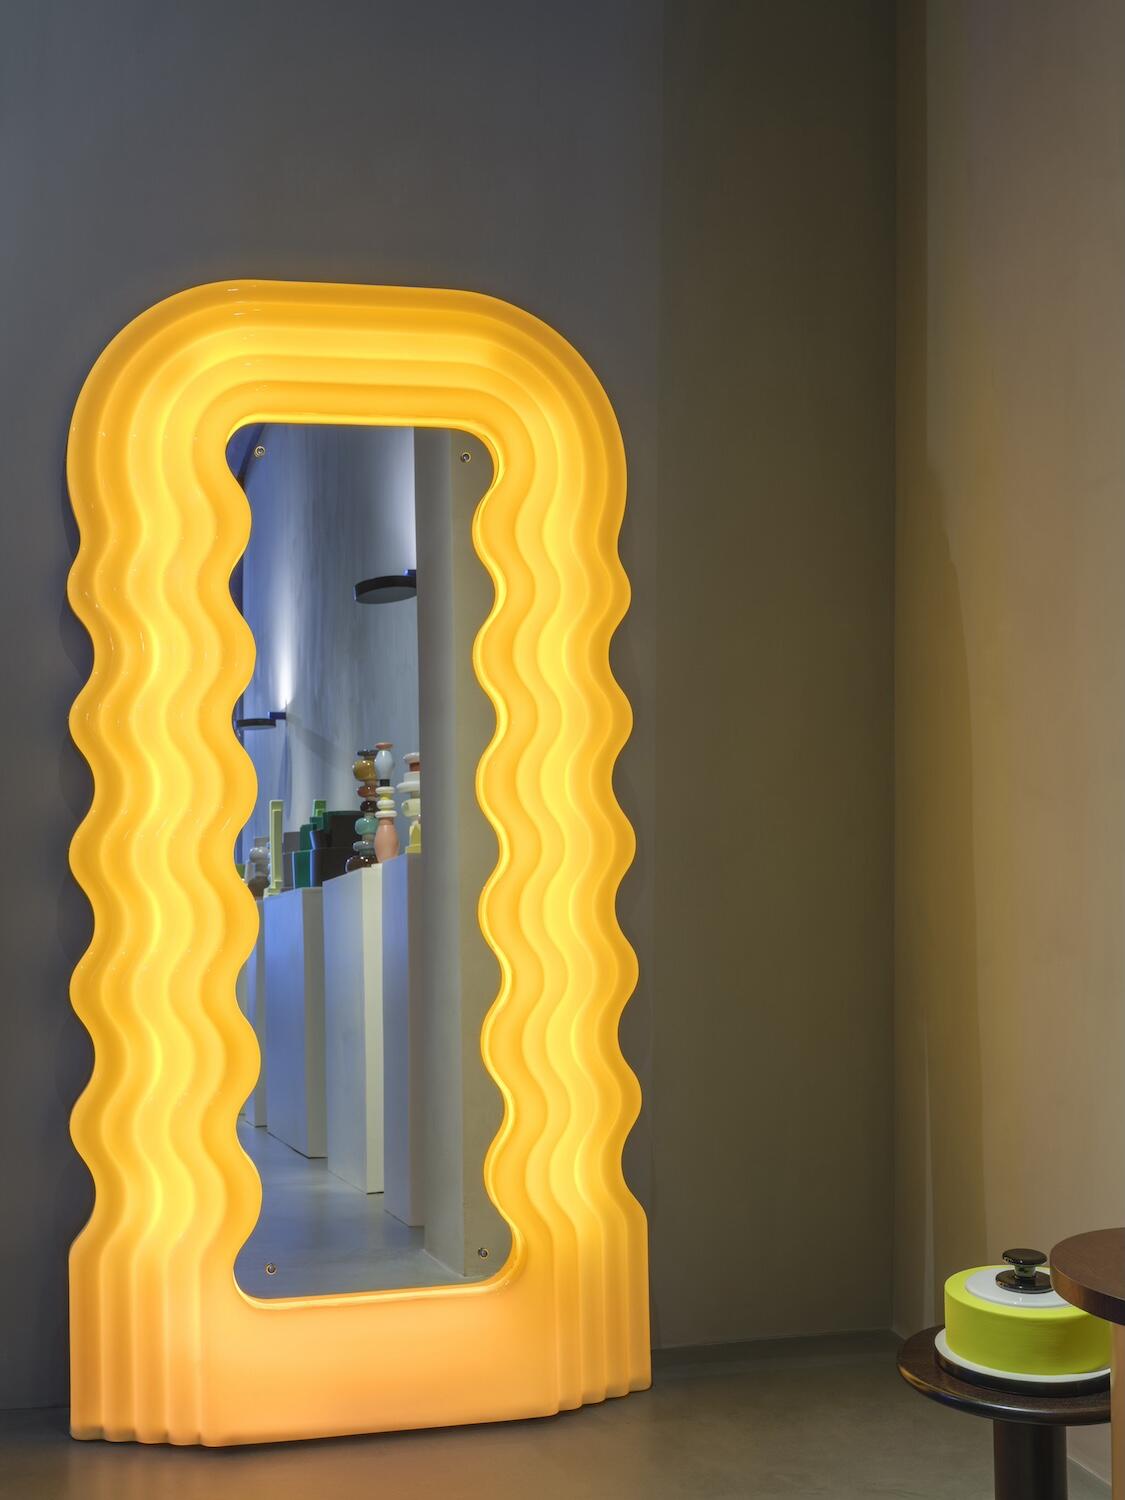 The Ultrafragola mirror by Ettore Sottsass